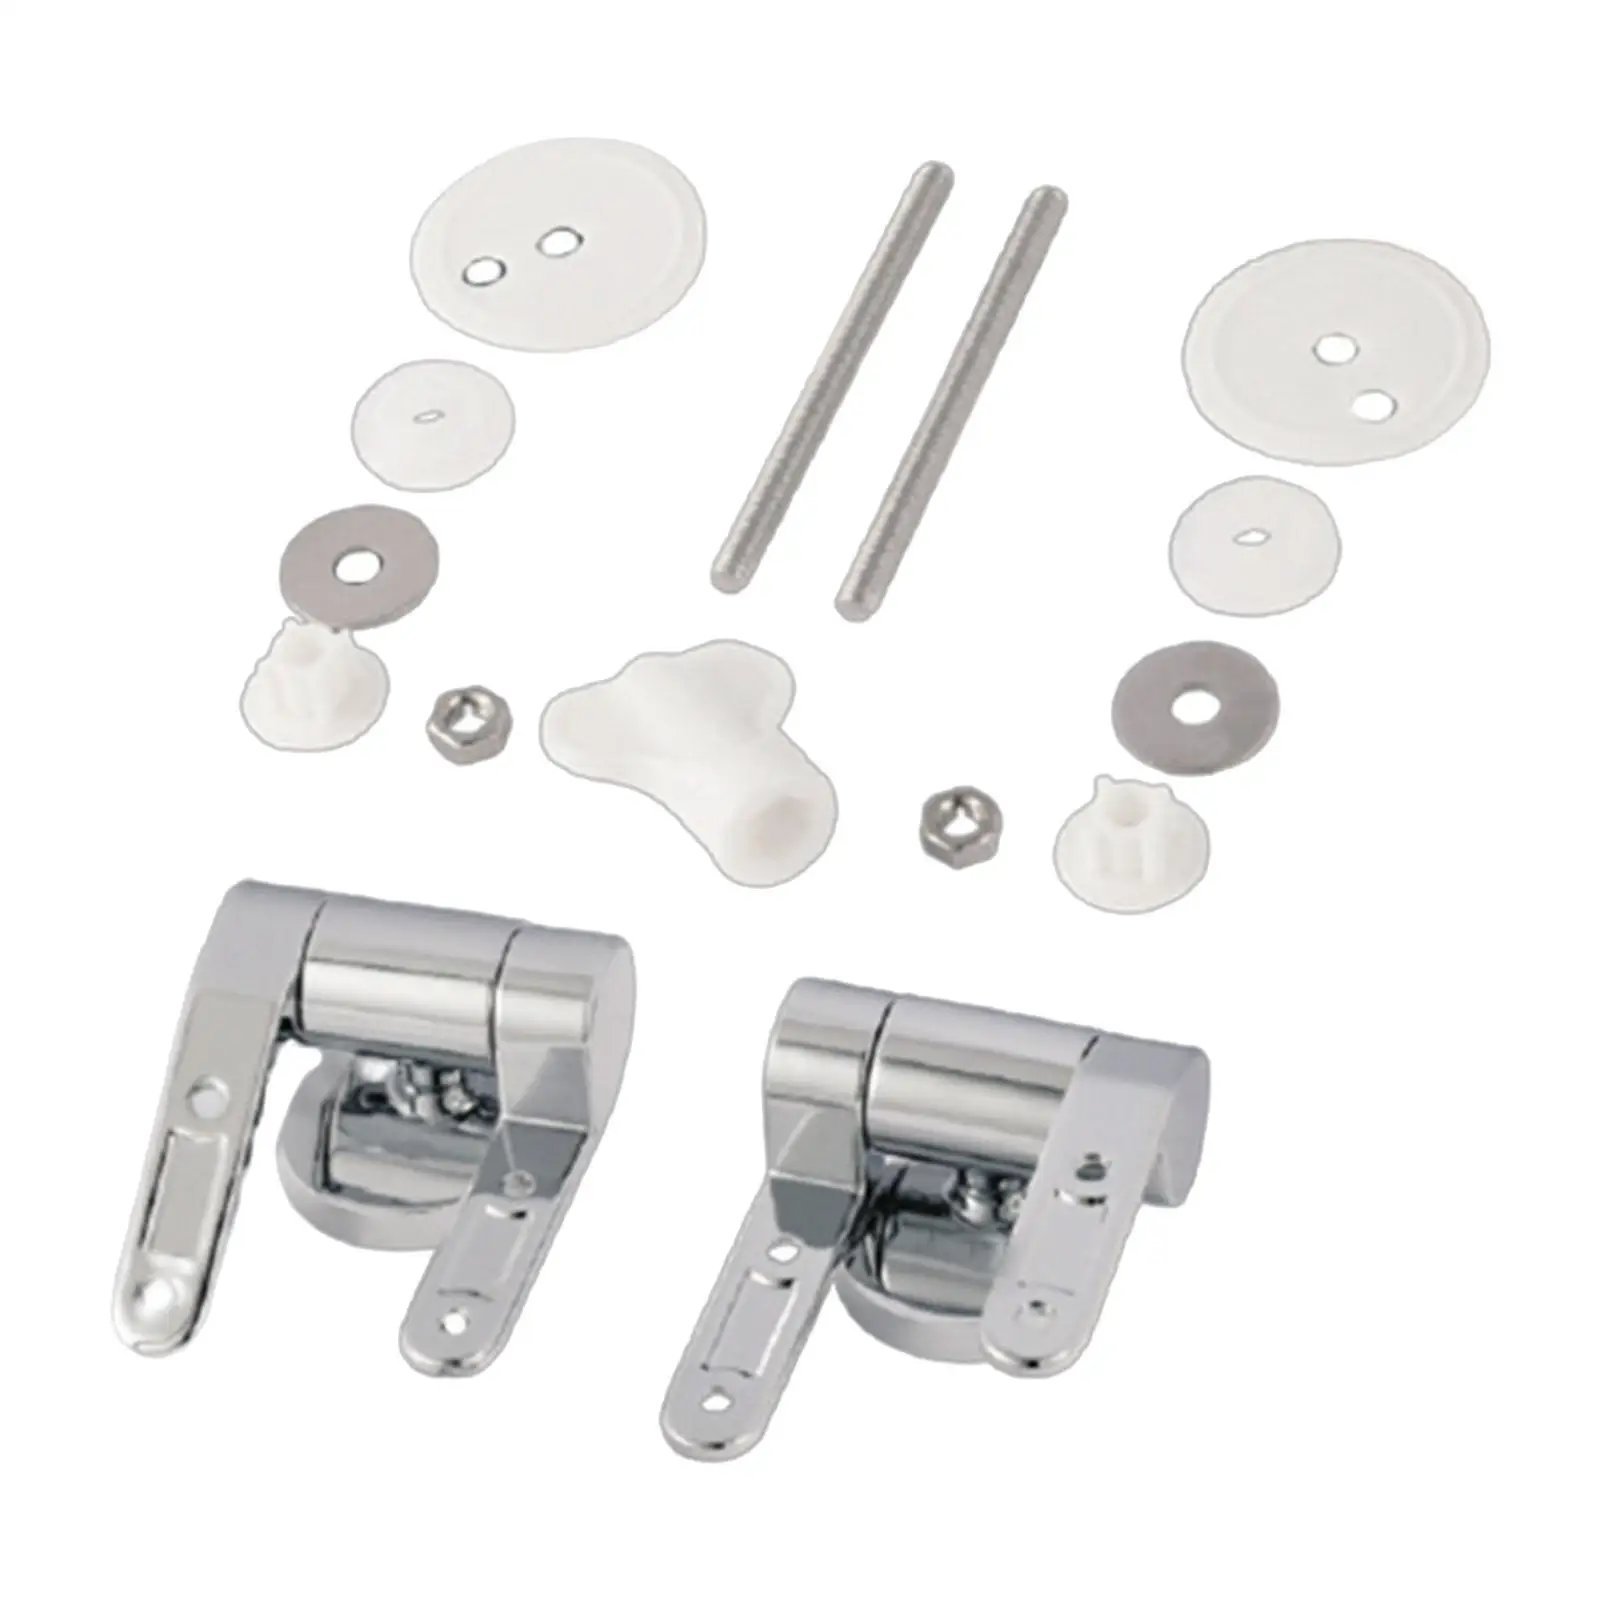 Toilet Seat Hinge Mountings Fixtures Accessories Fixing Bracket for Toilet Lids Washing Machine Bath Telescopic Rice Cooker Lids